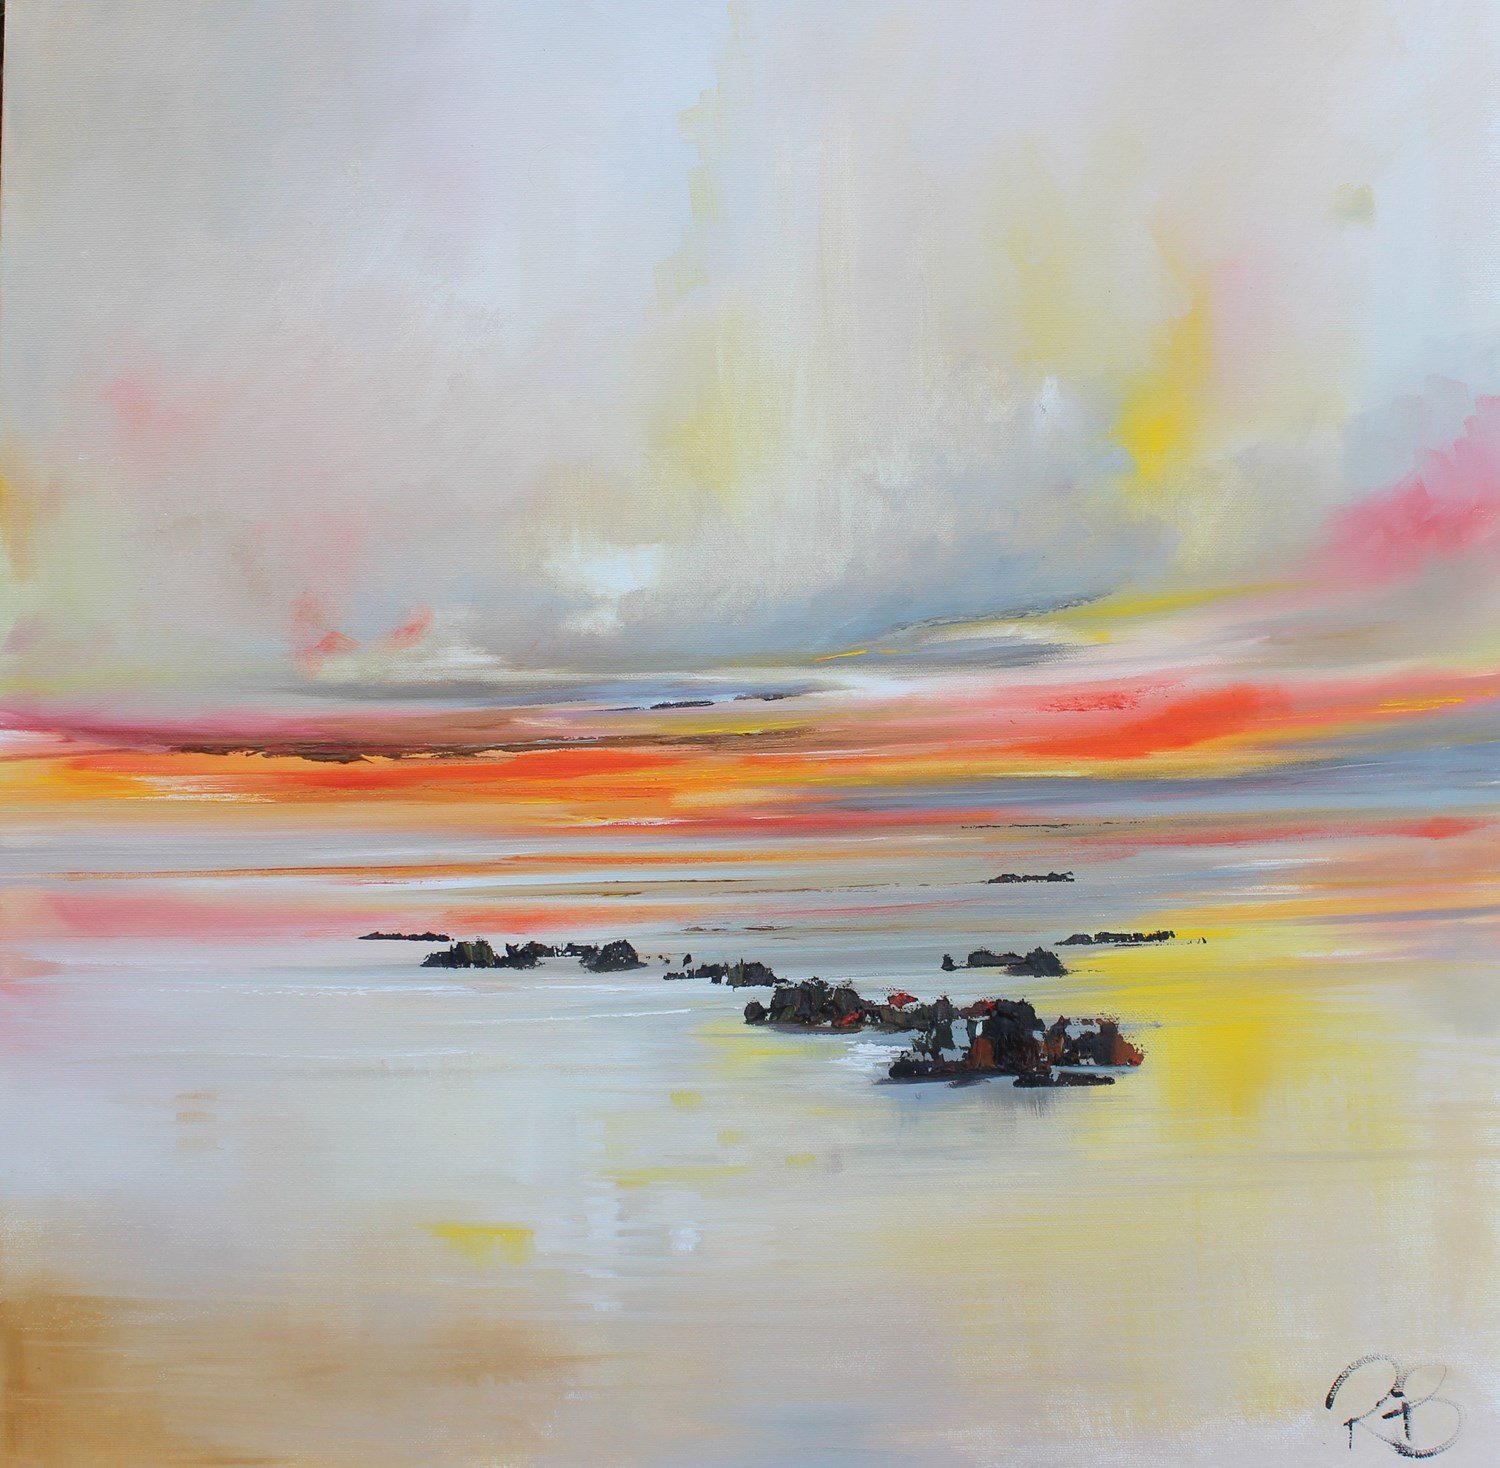 'Waiting on the Tide to turn' by artist Rosanne Barr